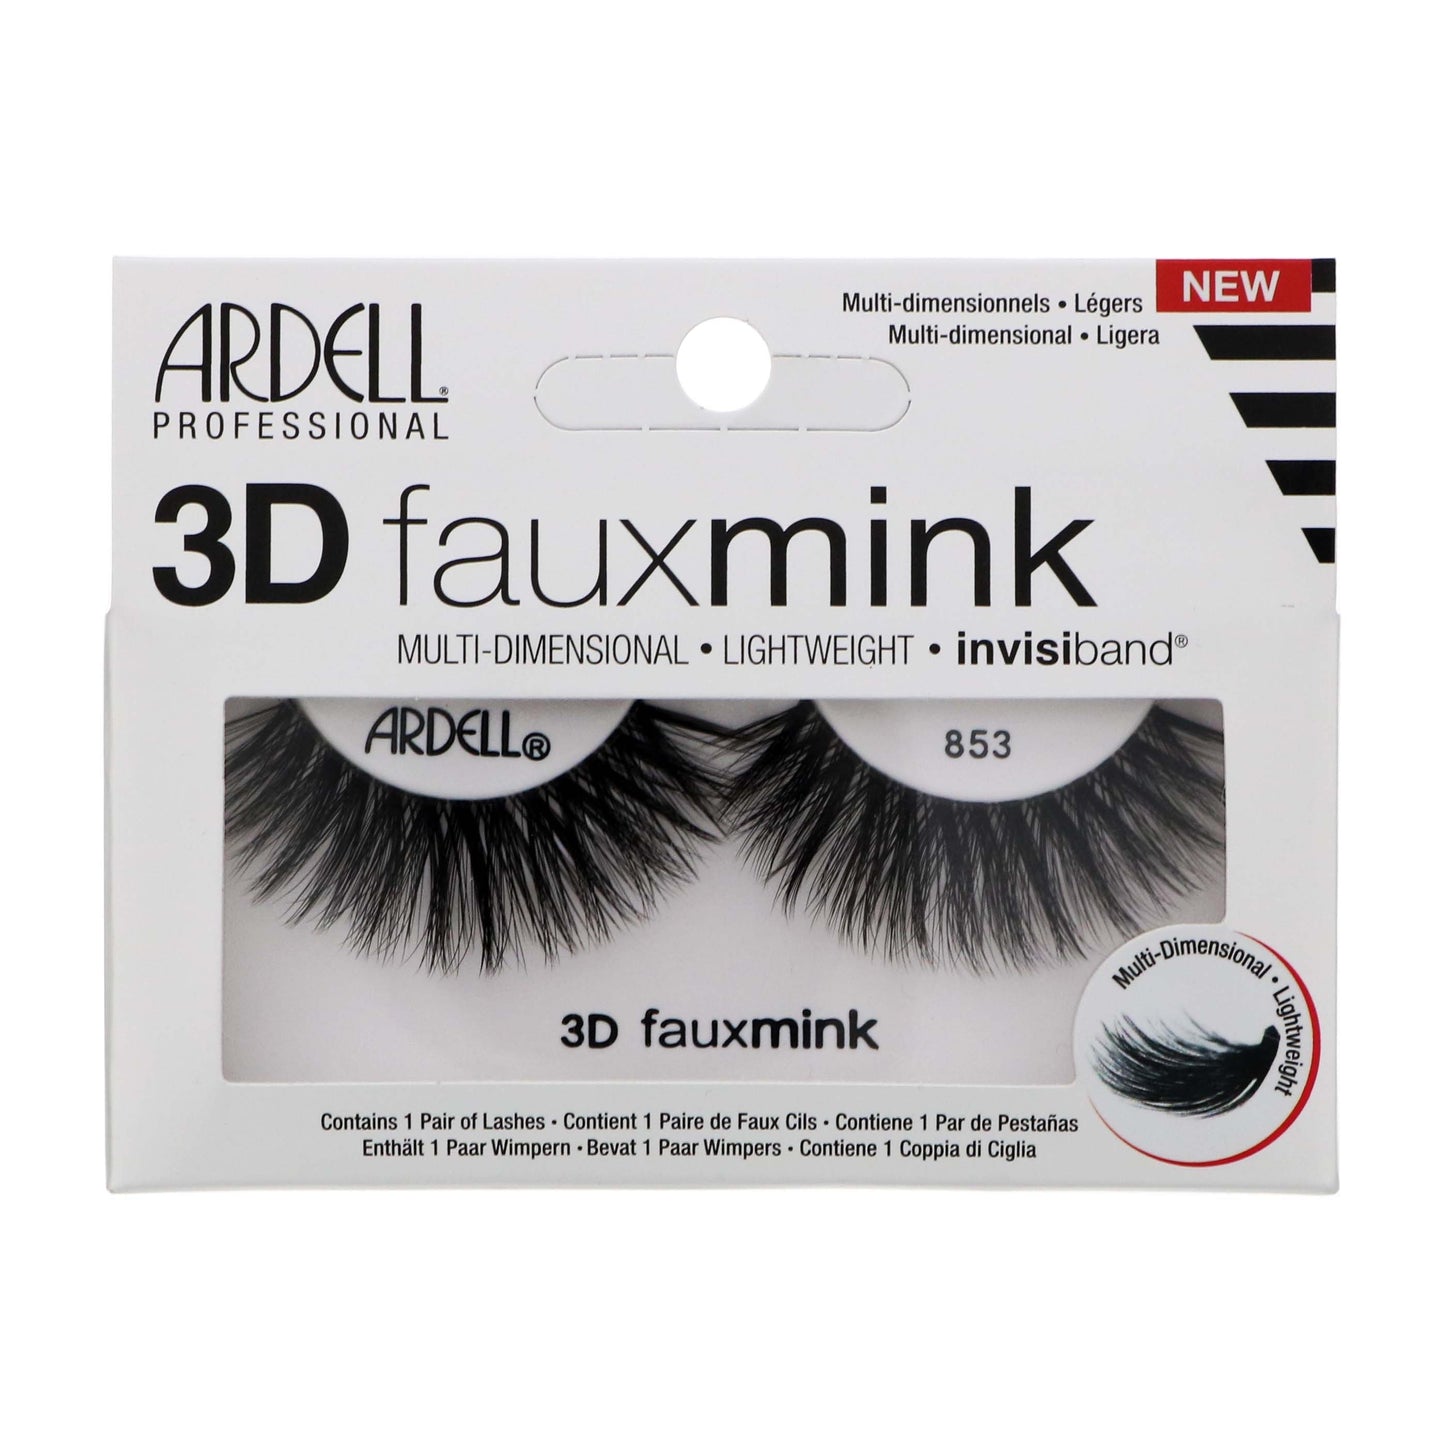 Ardell 3D Fauxmink Lashes 853